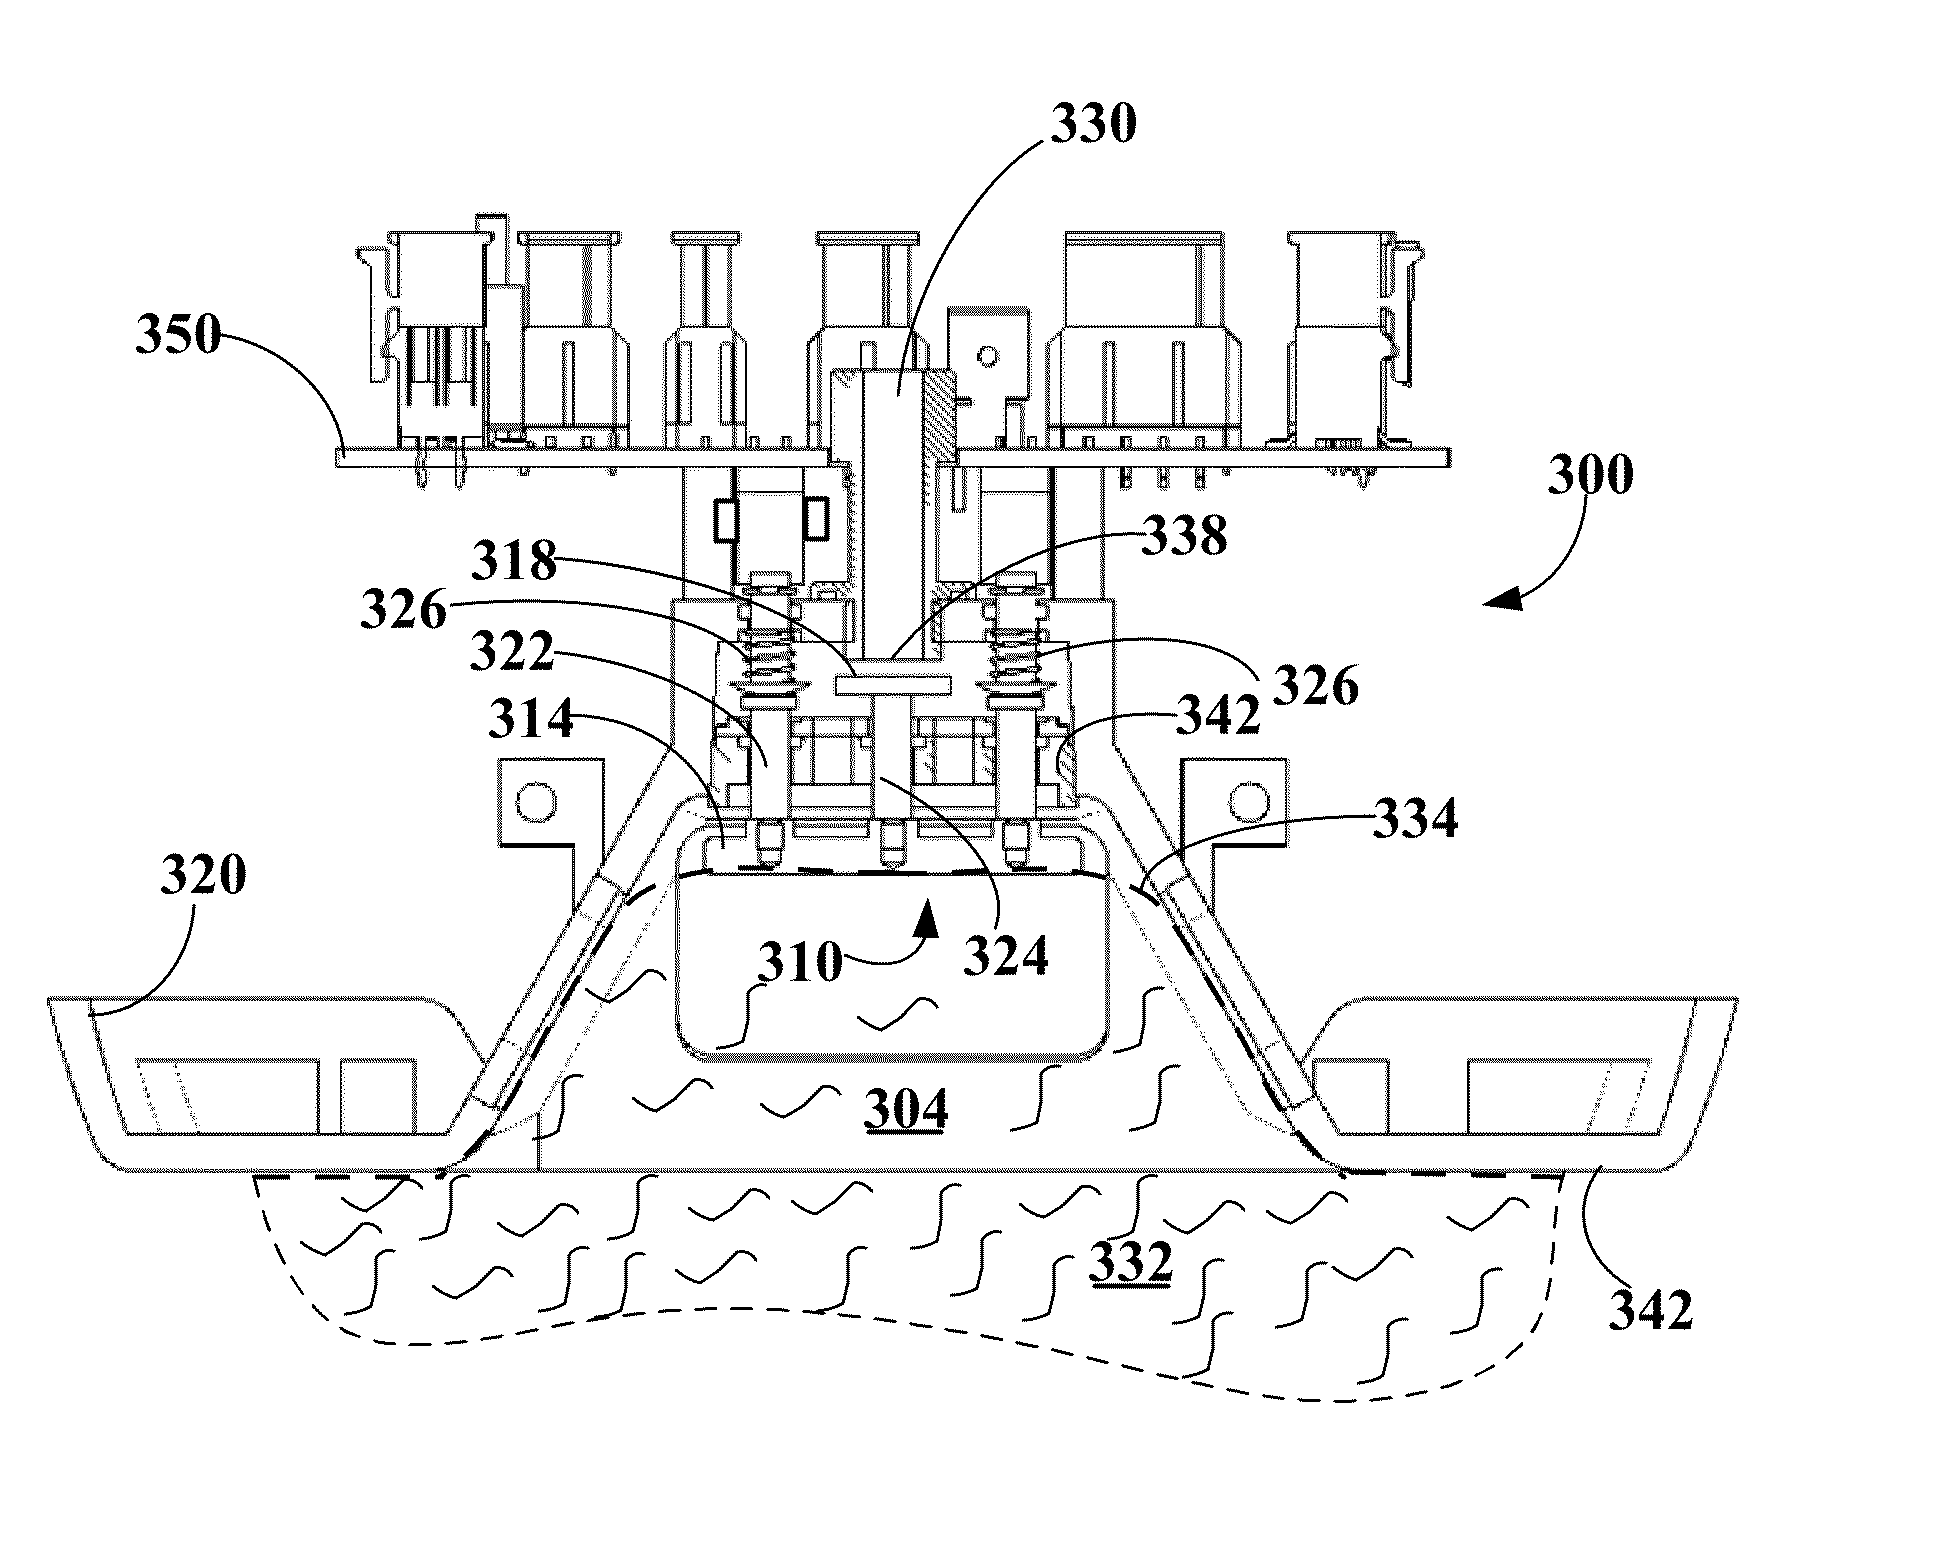 Applicator for skin treatement with automatic regulation of skin protrusion magnitude